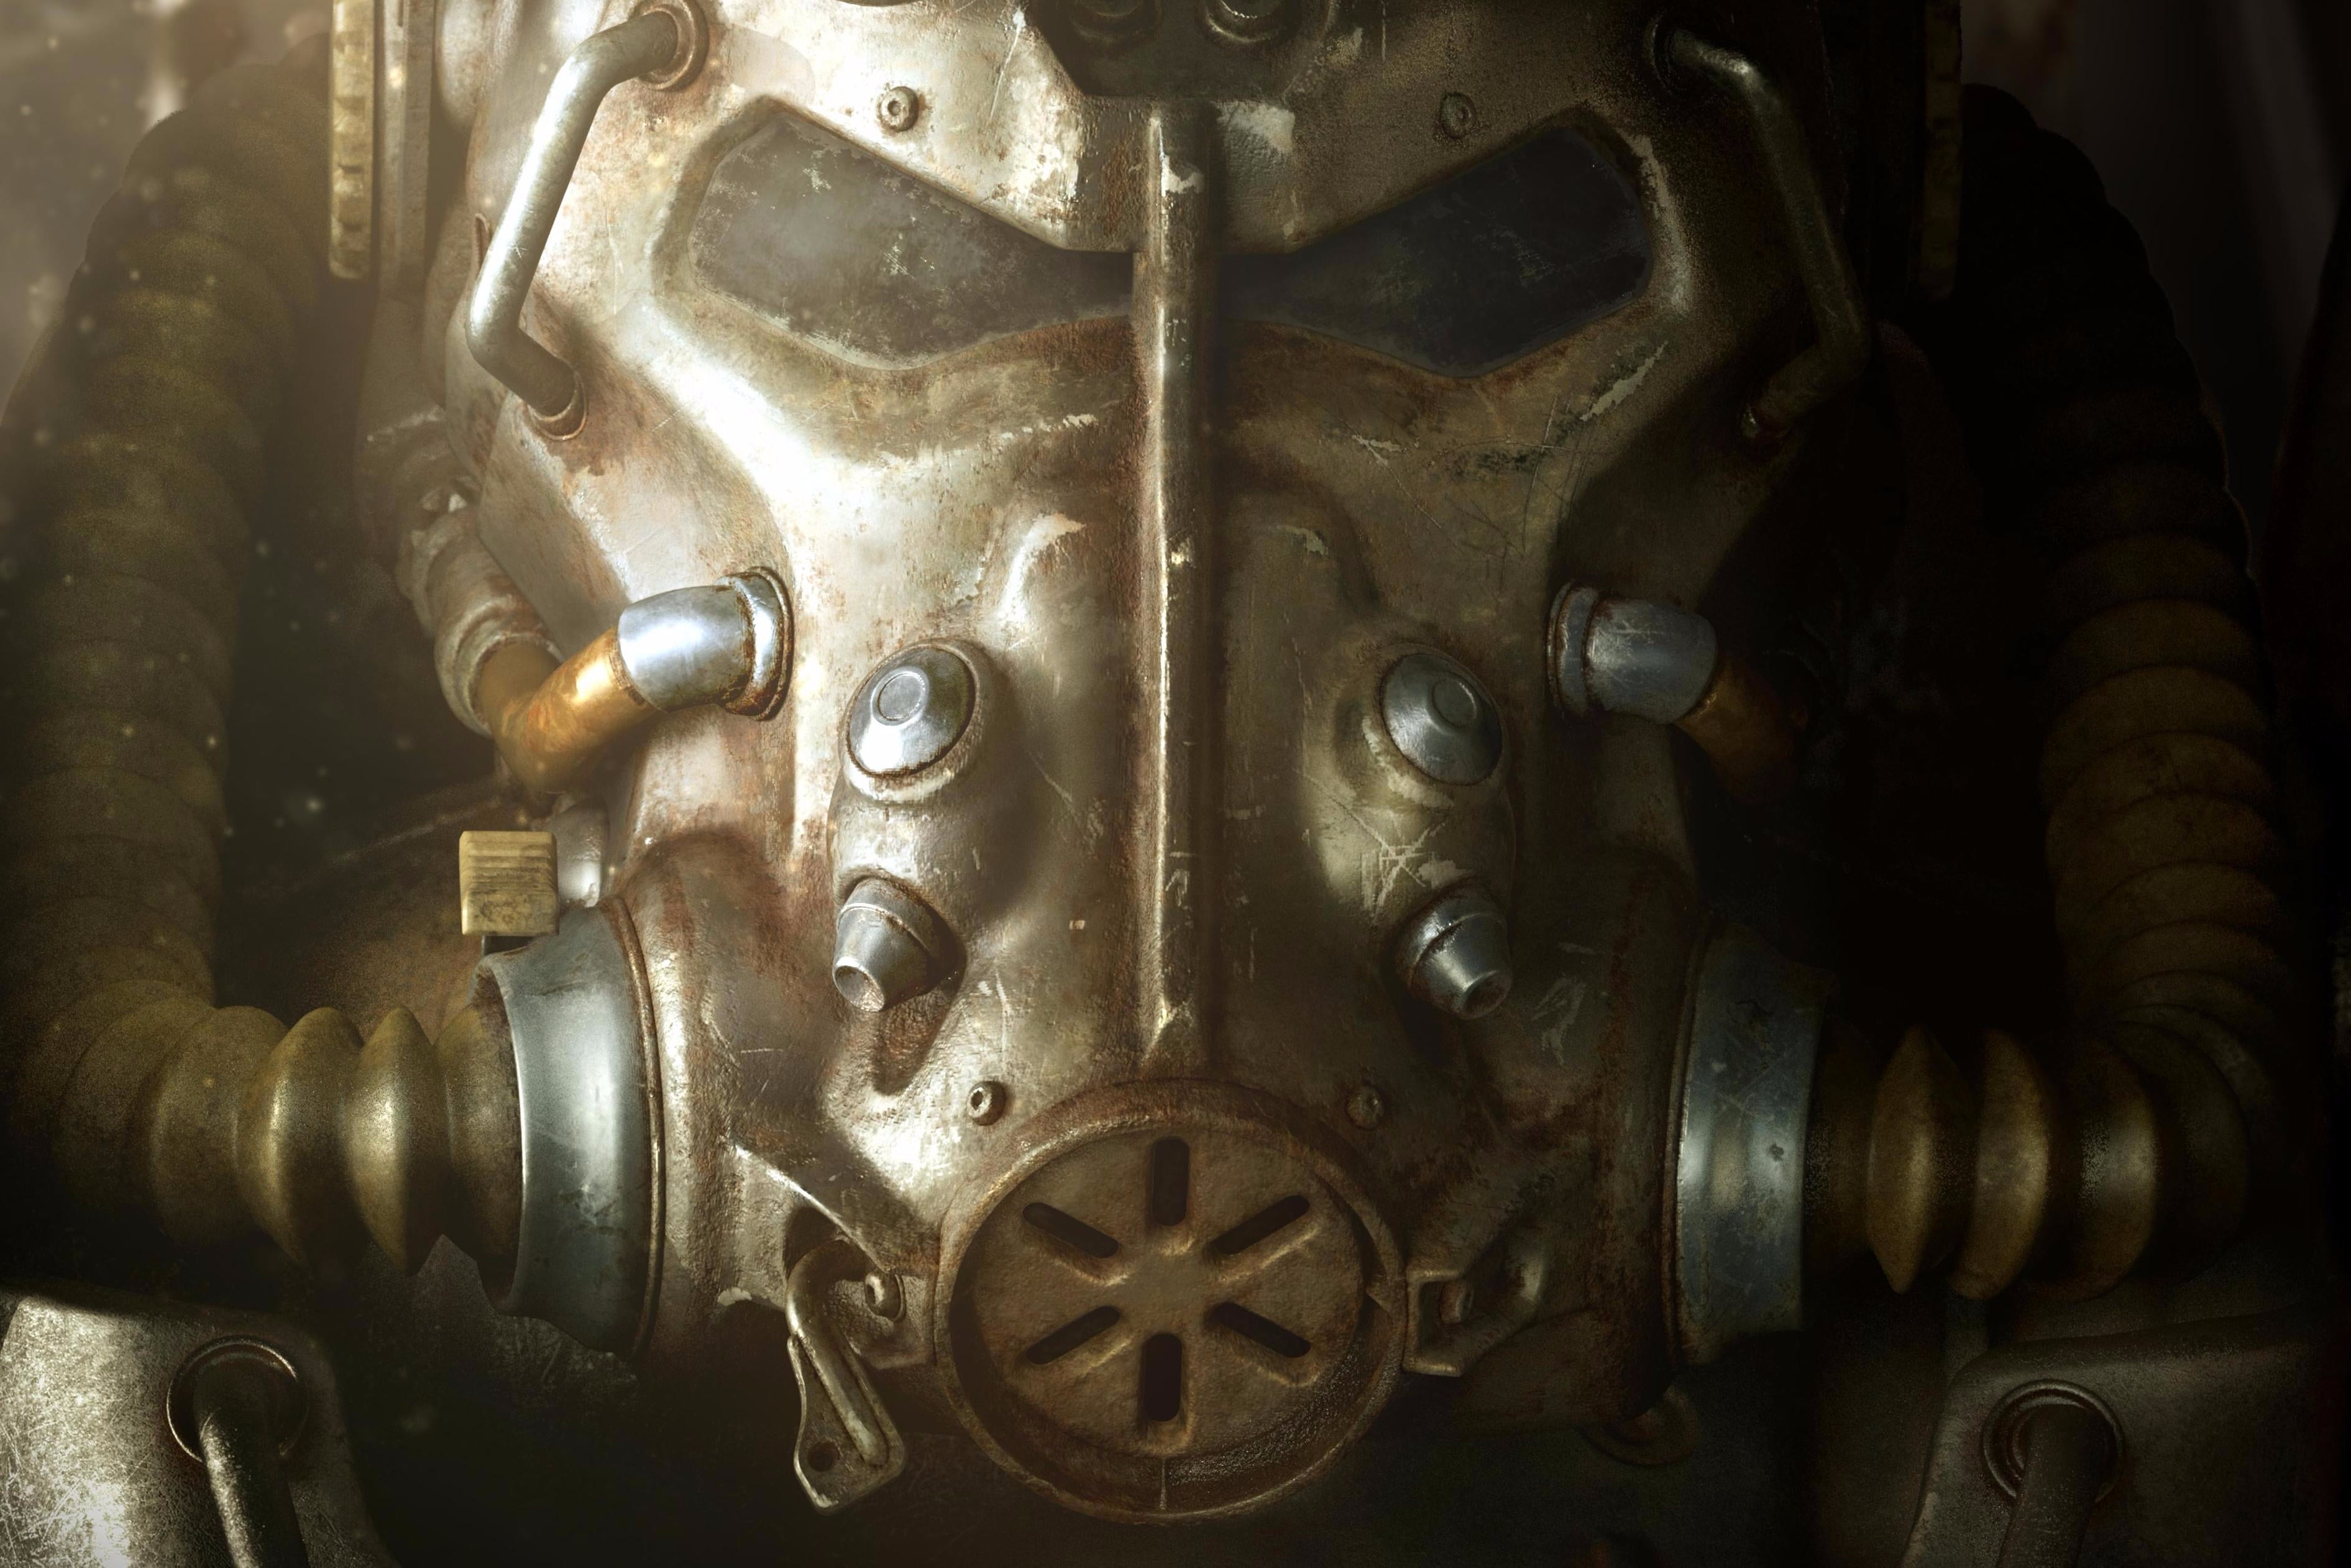 Fallout 4 on PS4 Pro: the upgrade we've been waiting for? 